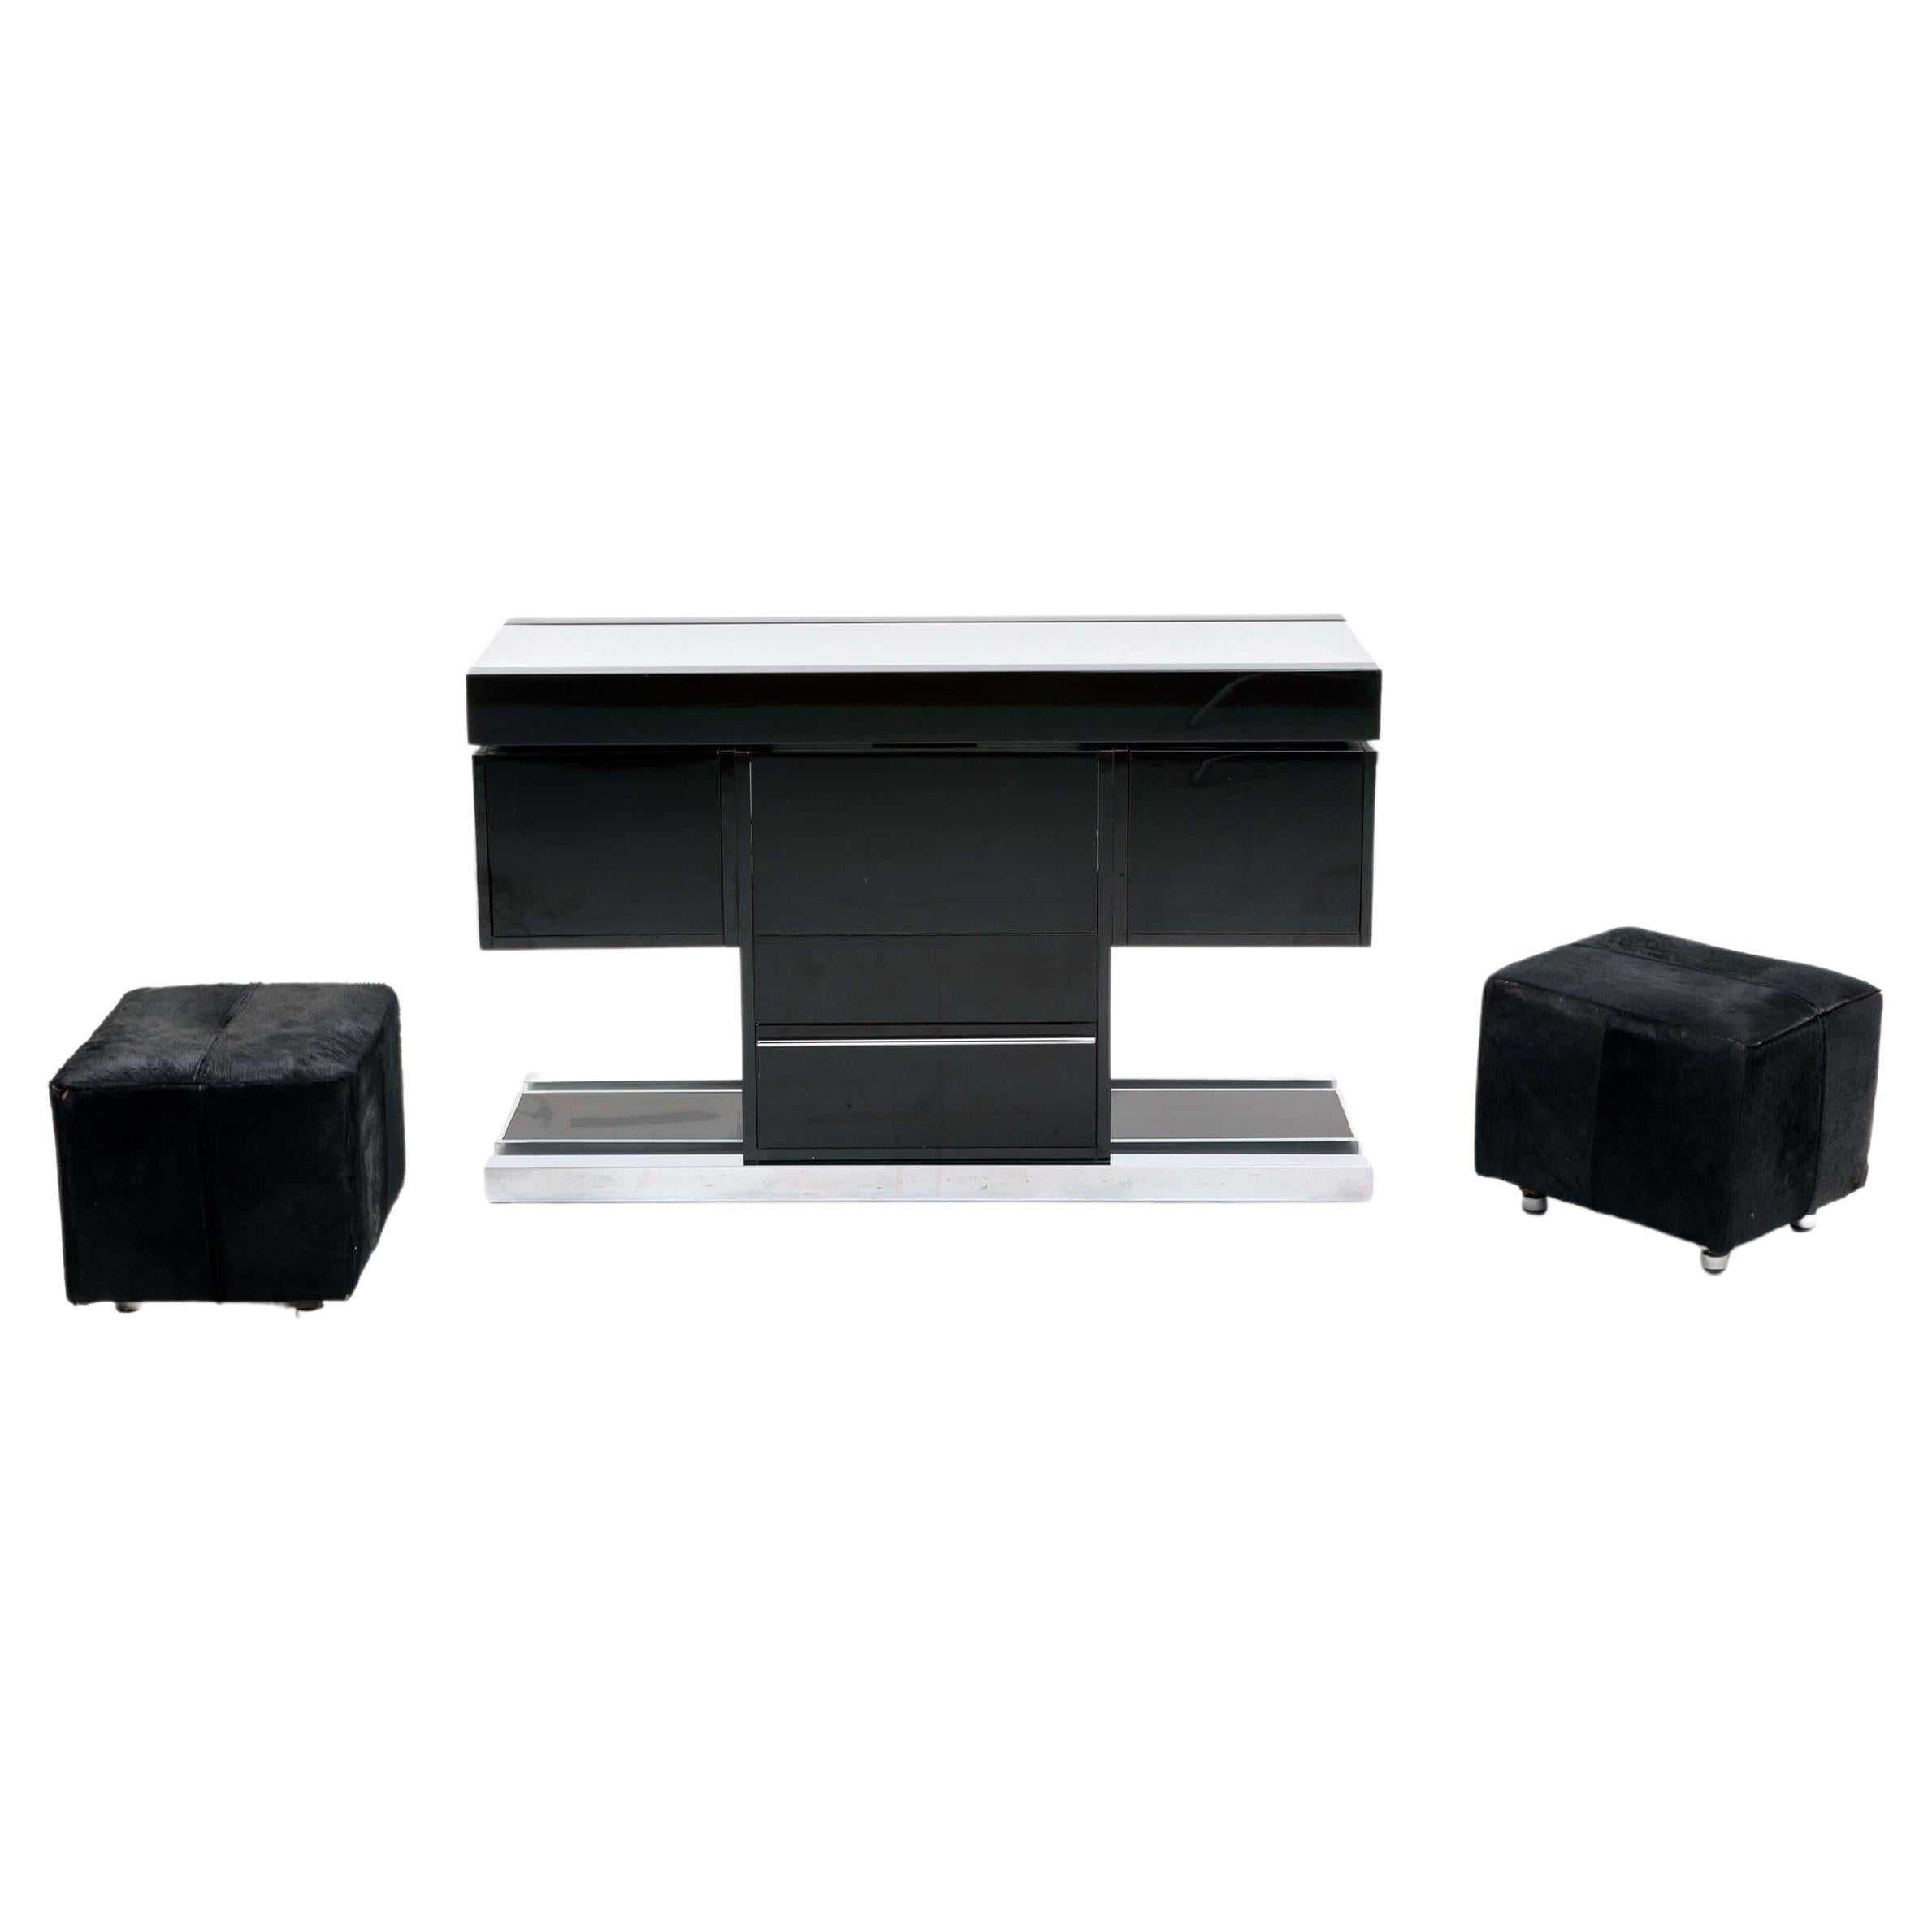 Black Lacquer Dry Bar Set, Chrome Detailing, Cow Hide Upholstery, circa 1970